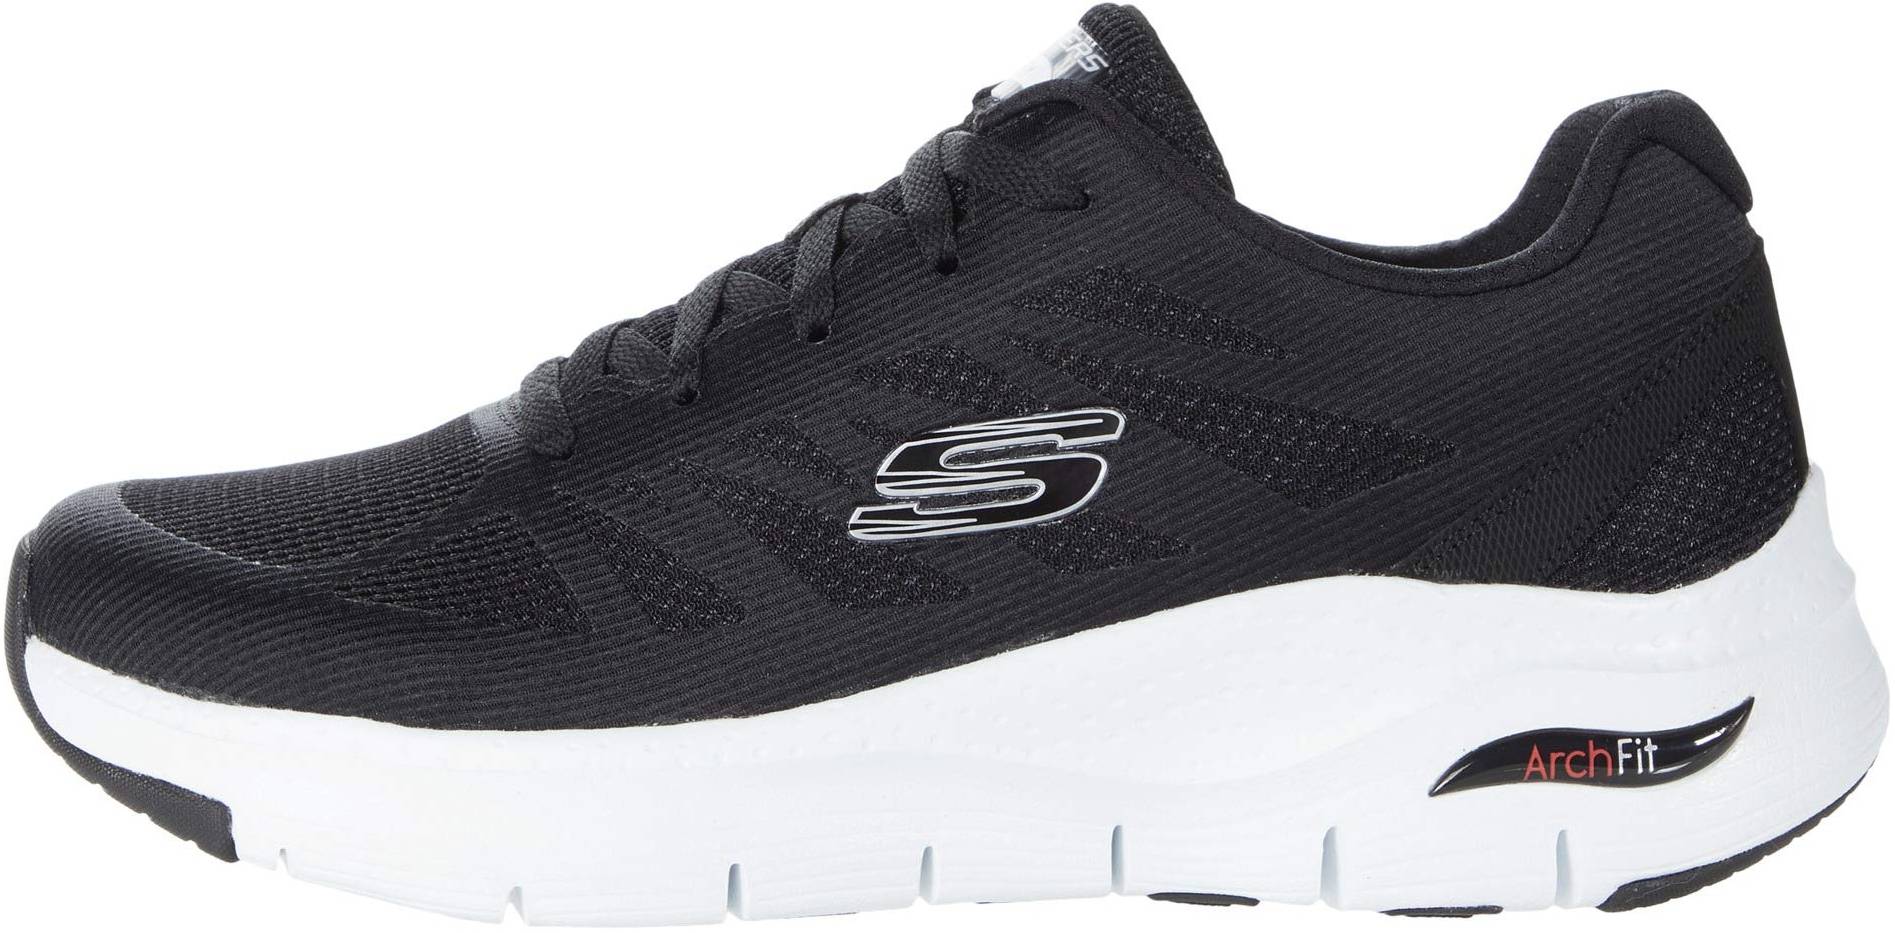 skechers shoes stock